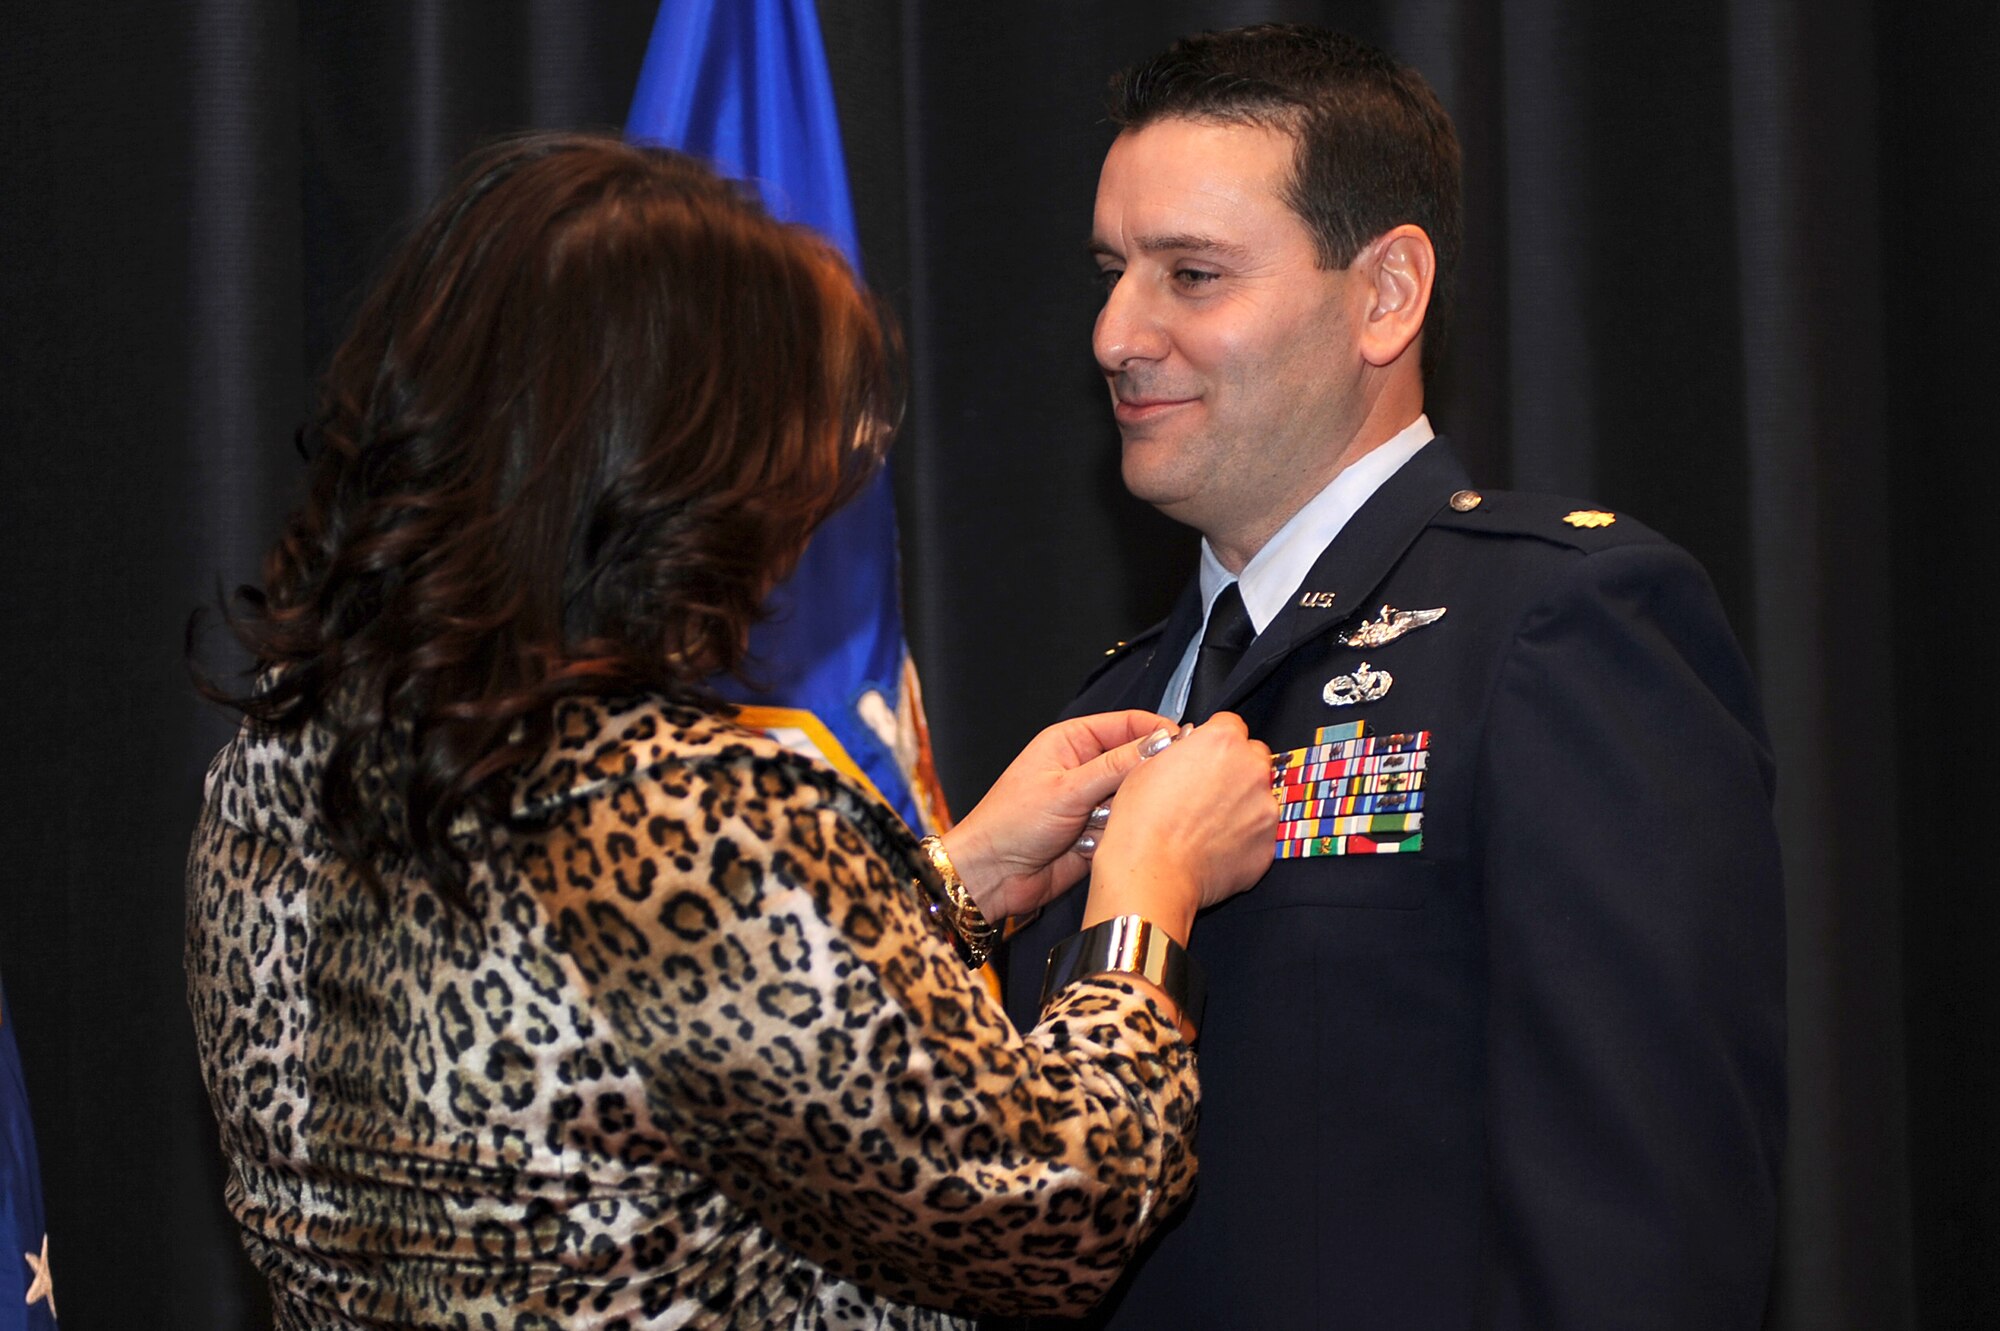 Theresa Yerger pins a retirement pin on her husband, Maj. John M. Yerger, during his retirement ceremony in the U.S. Air Force Expeditionary Center on Fort Dix, N.J., Jan. 9, 2009.  Major Yerger was the assistant chief, logistics and resources for the Center's Expeditionary Operations School.  Prior to this position, Major Yerger served for four years in the Air Mobility Battlelab as a project manager and the chief of finance and program support.  Major Yerger's retirement is effective on March 1. (U.S. Air Force Photo/Staff Sgt. Nathan Bevier)